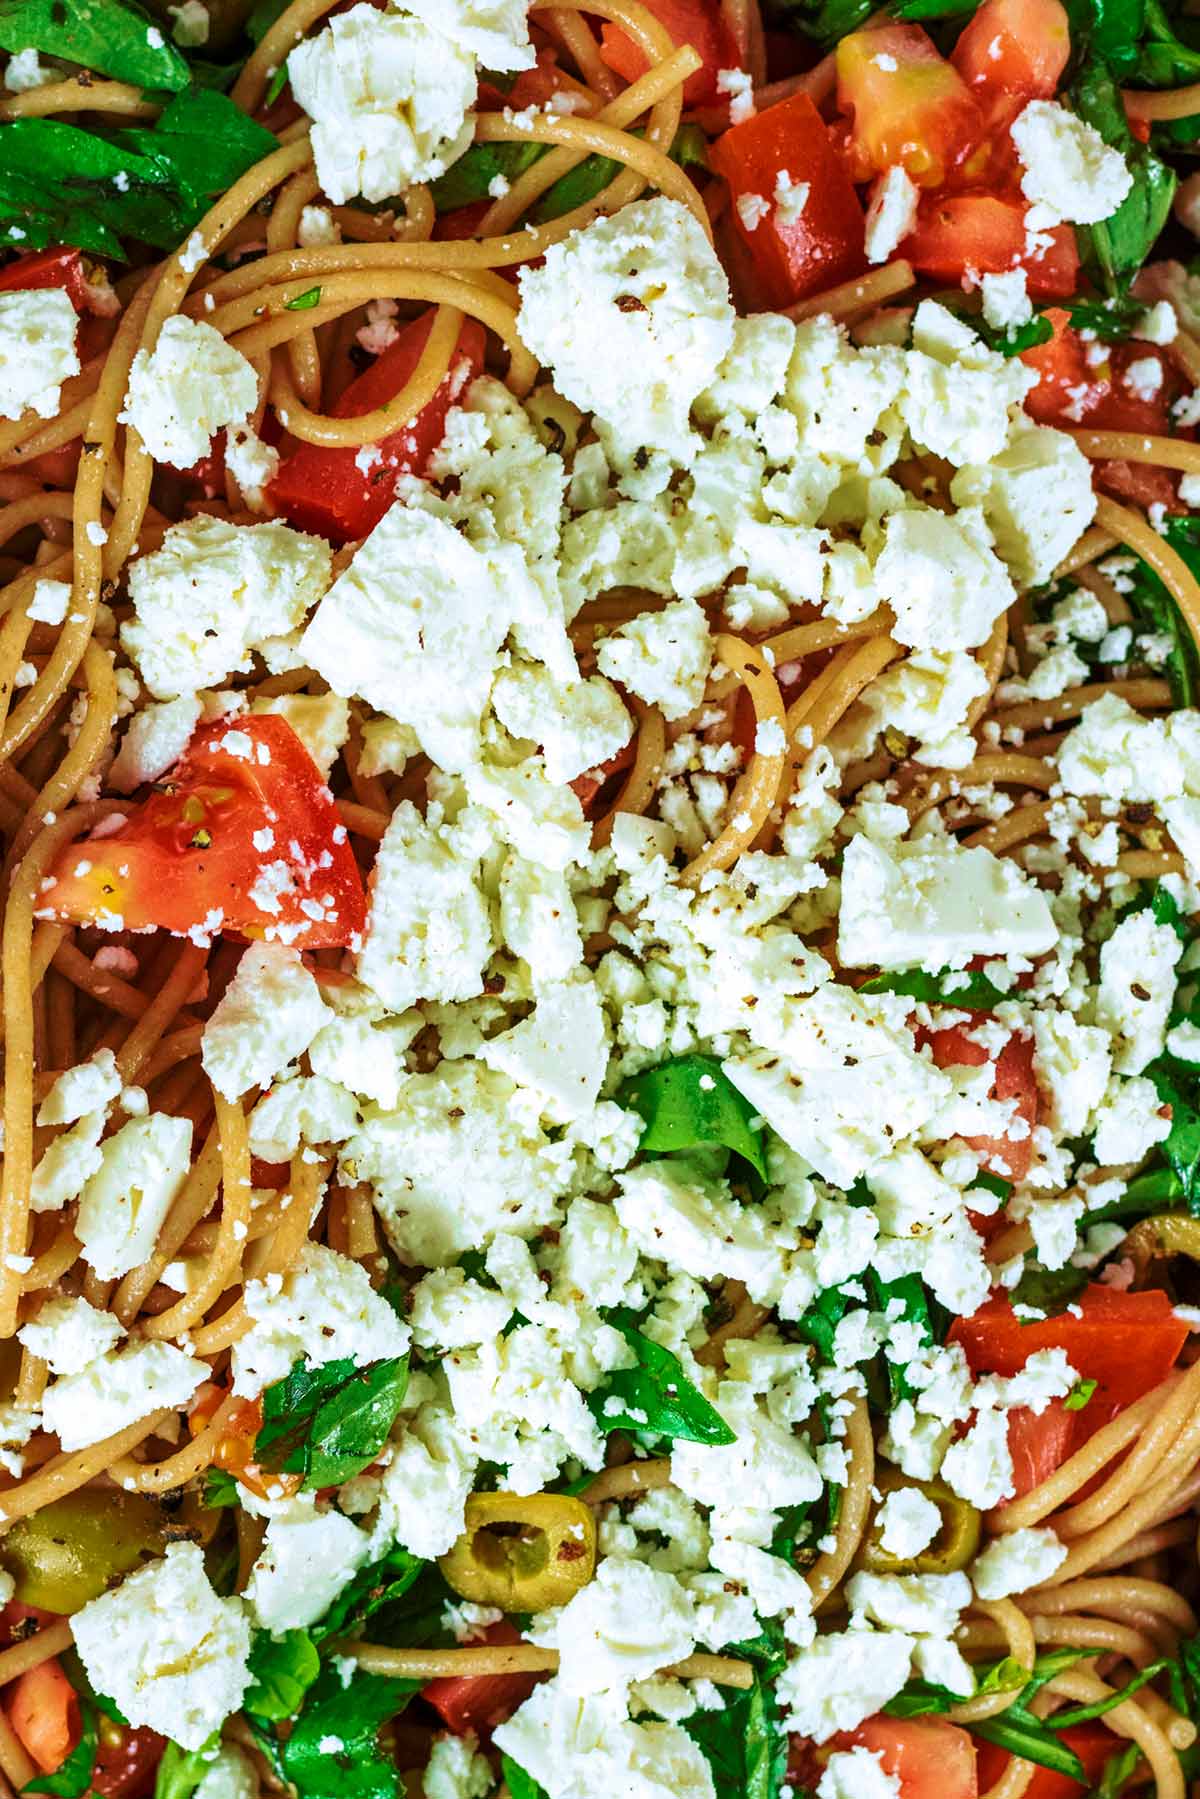 Crumbled feta on top of spaghetti, tomatoes, olives and basil.